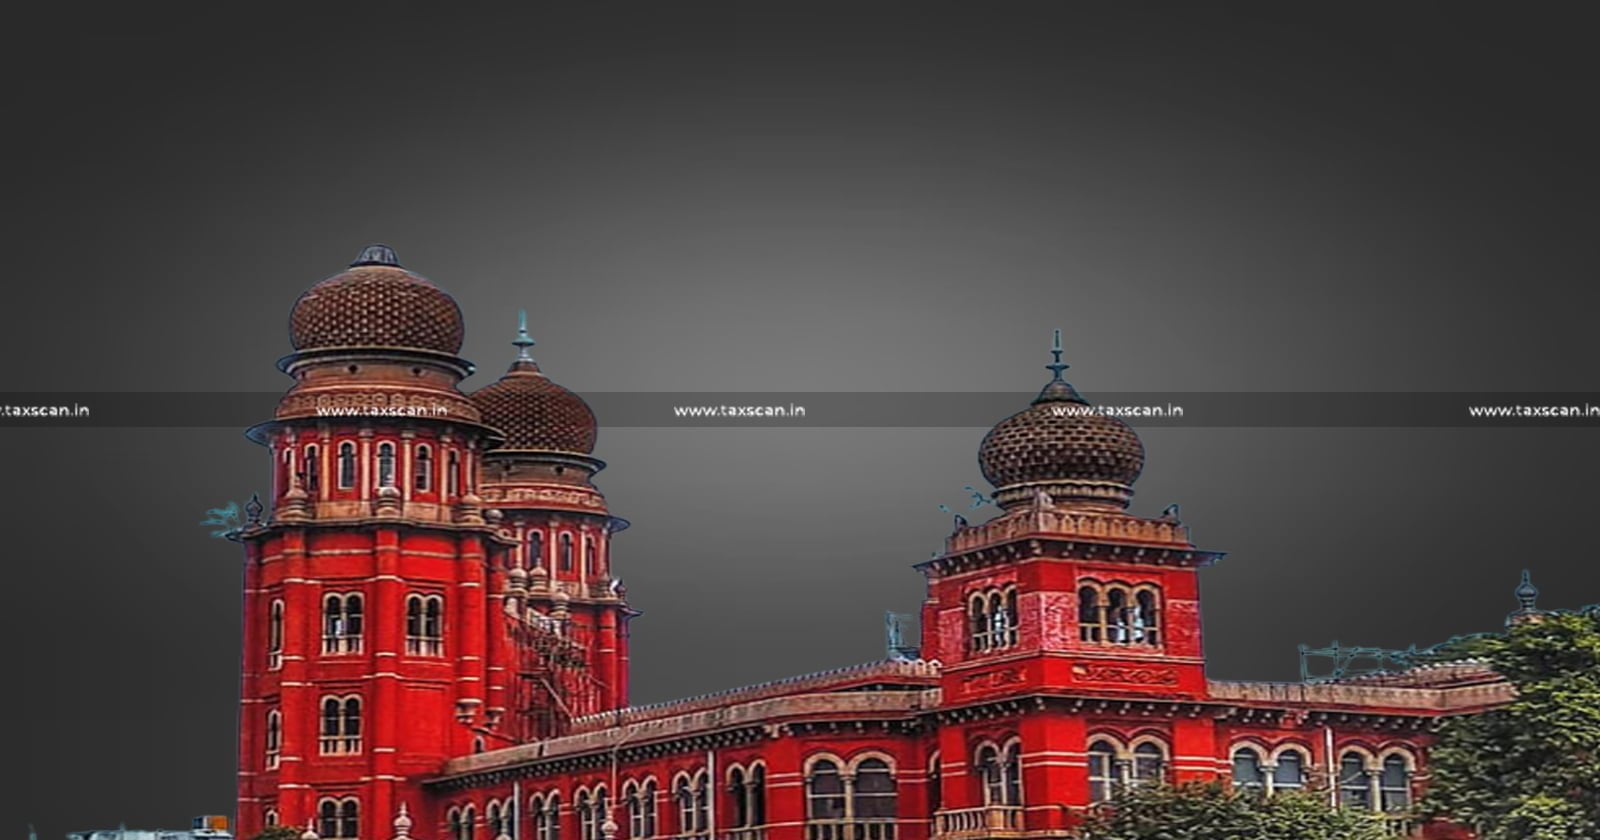 Madras High court - Income Tax Act - Compounding of Offence Application - Madras High Court Ruling - Legal News on Income Tax Offences - Madras HC Compounding Offence Case - TAXSCAN